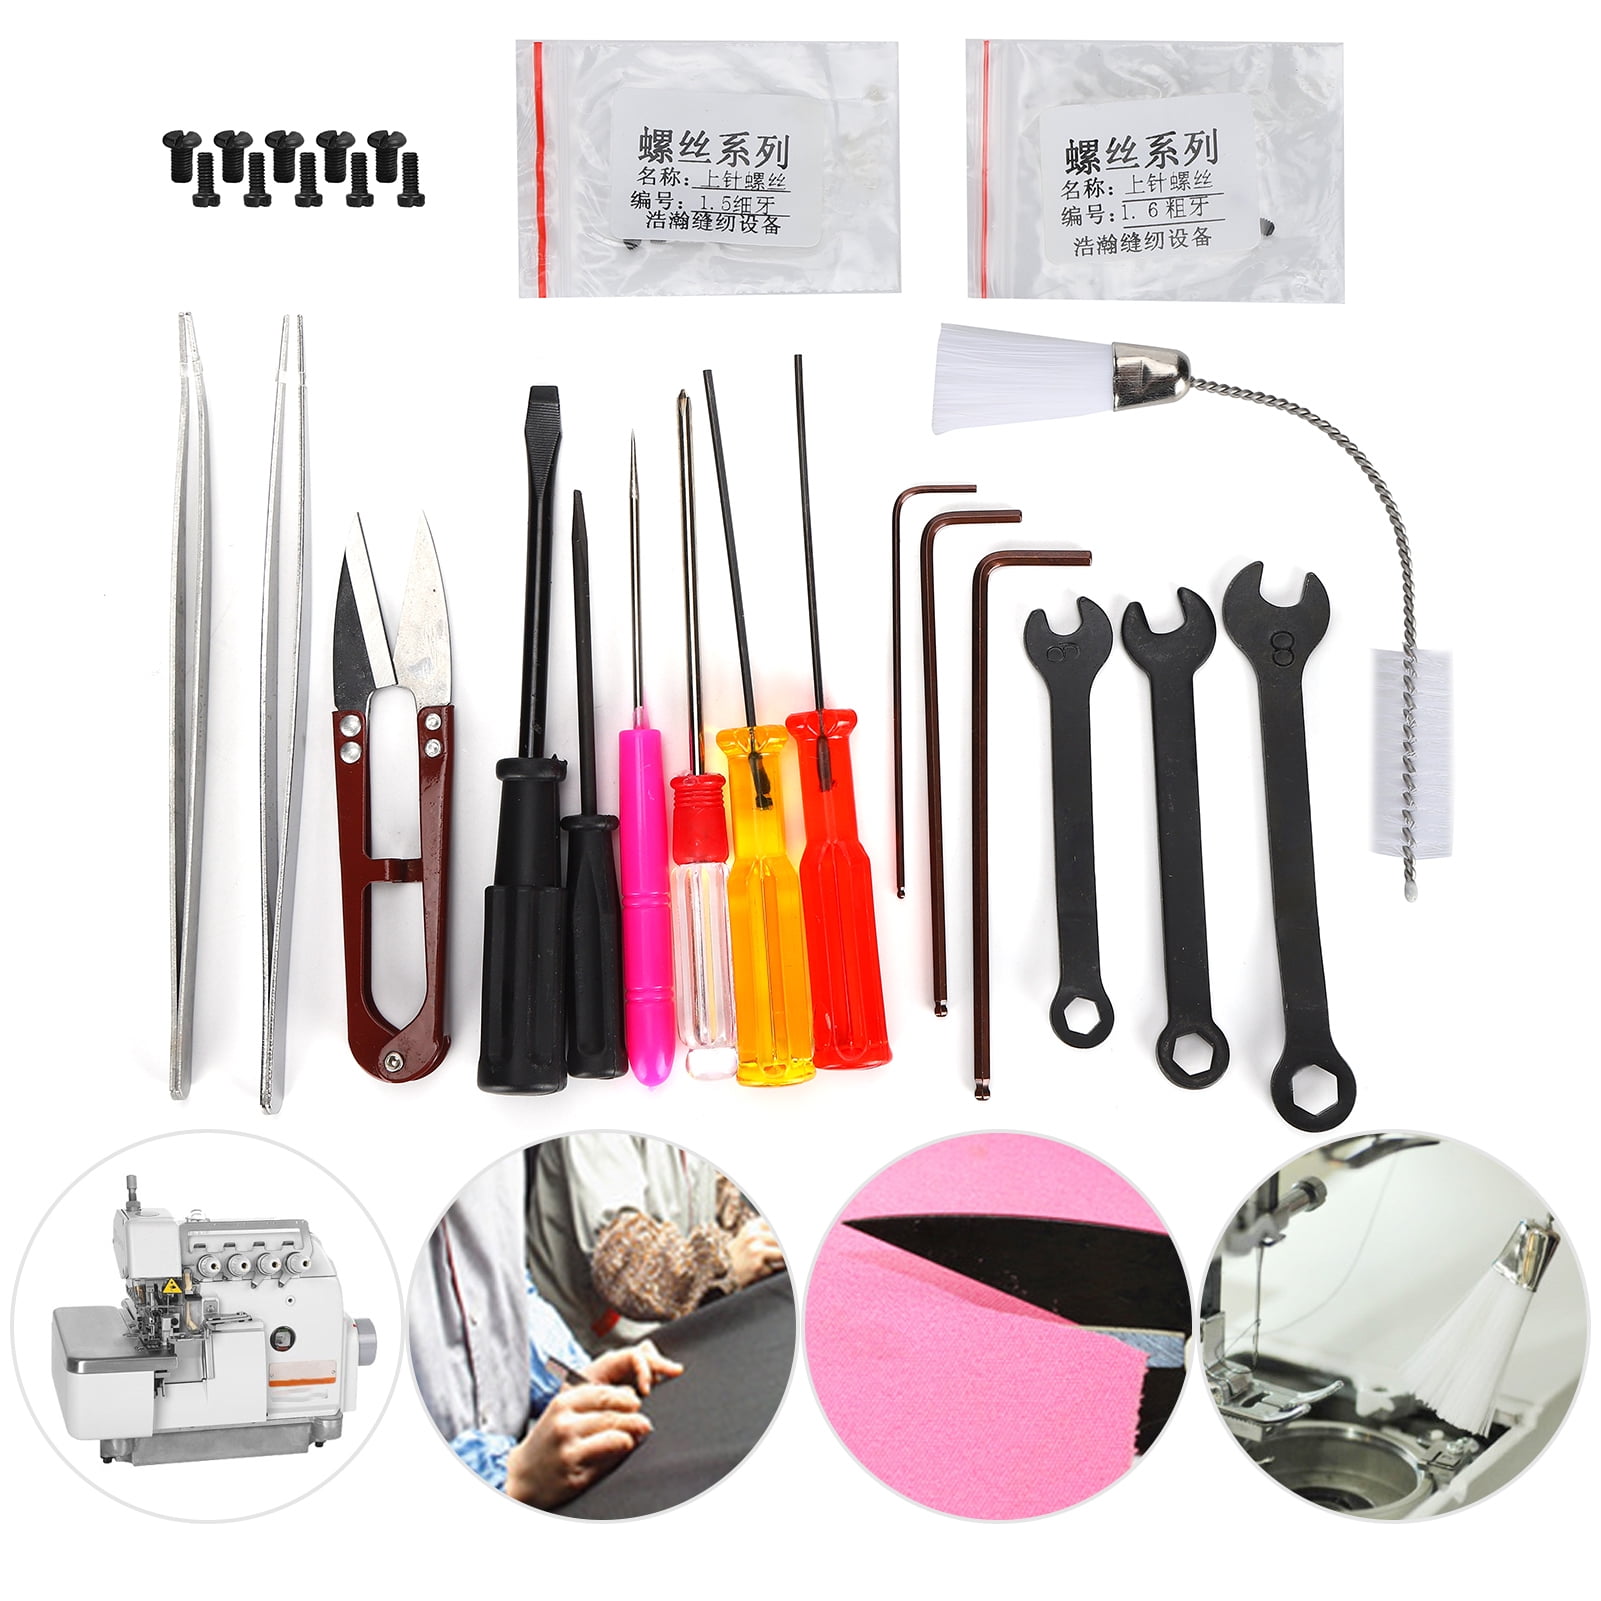 SZSONO Sewing Machine Repair Tool Kit, 6pcs Accessories Overlock & Serger Service Cleaning Kit Includes 2-in-1 Thread Removal Brush, Set of